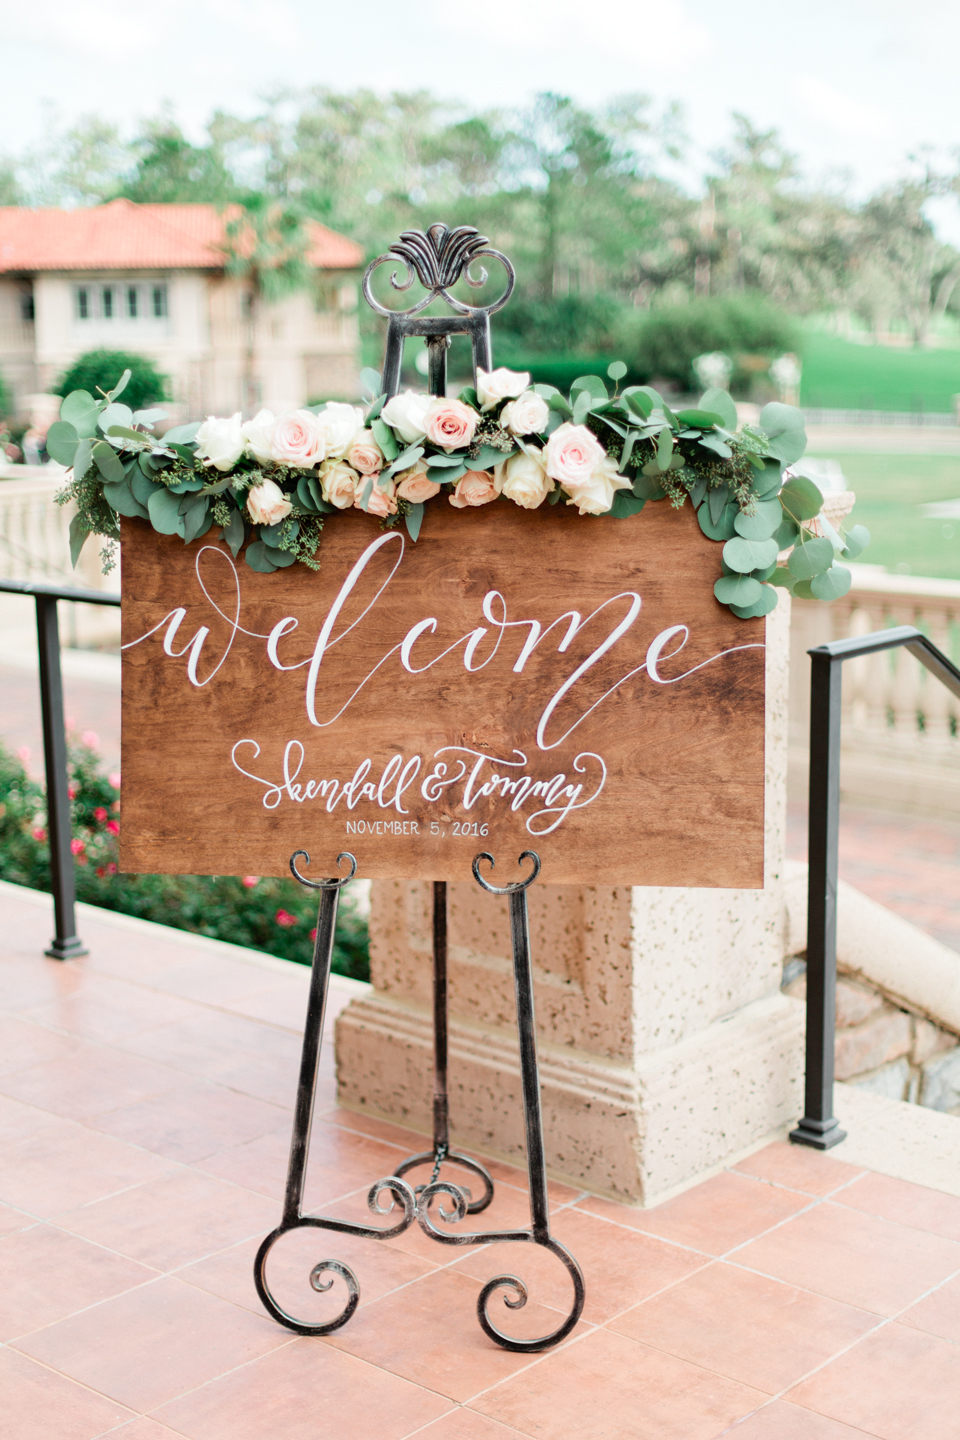 Image of wedding signage for the ceremony.  The sign says, "Welcome" in hand lettering.  The wedding is at TPC Sawgrass in Ponte Vedra, Florida